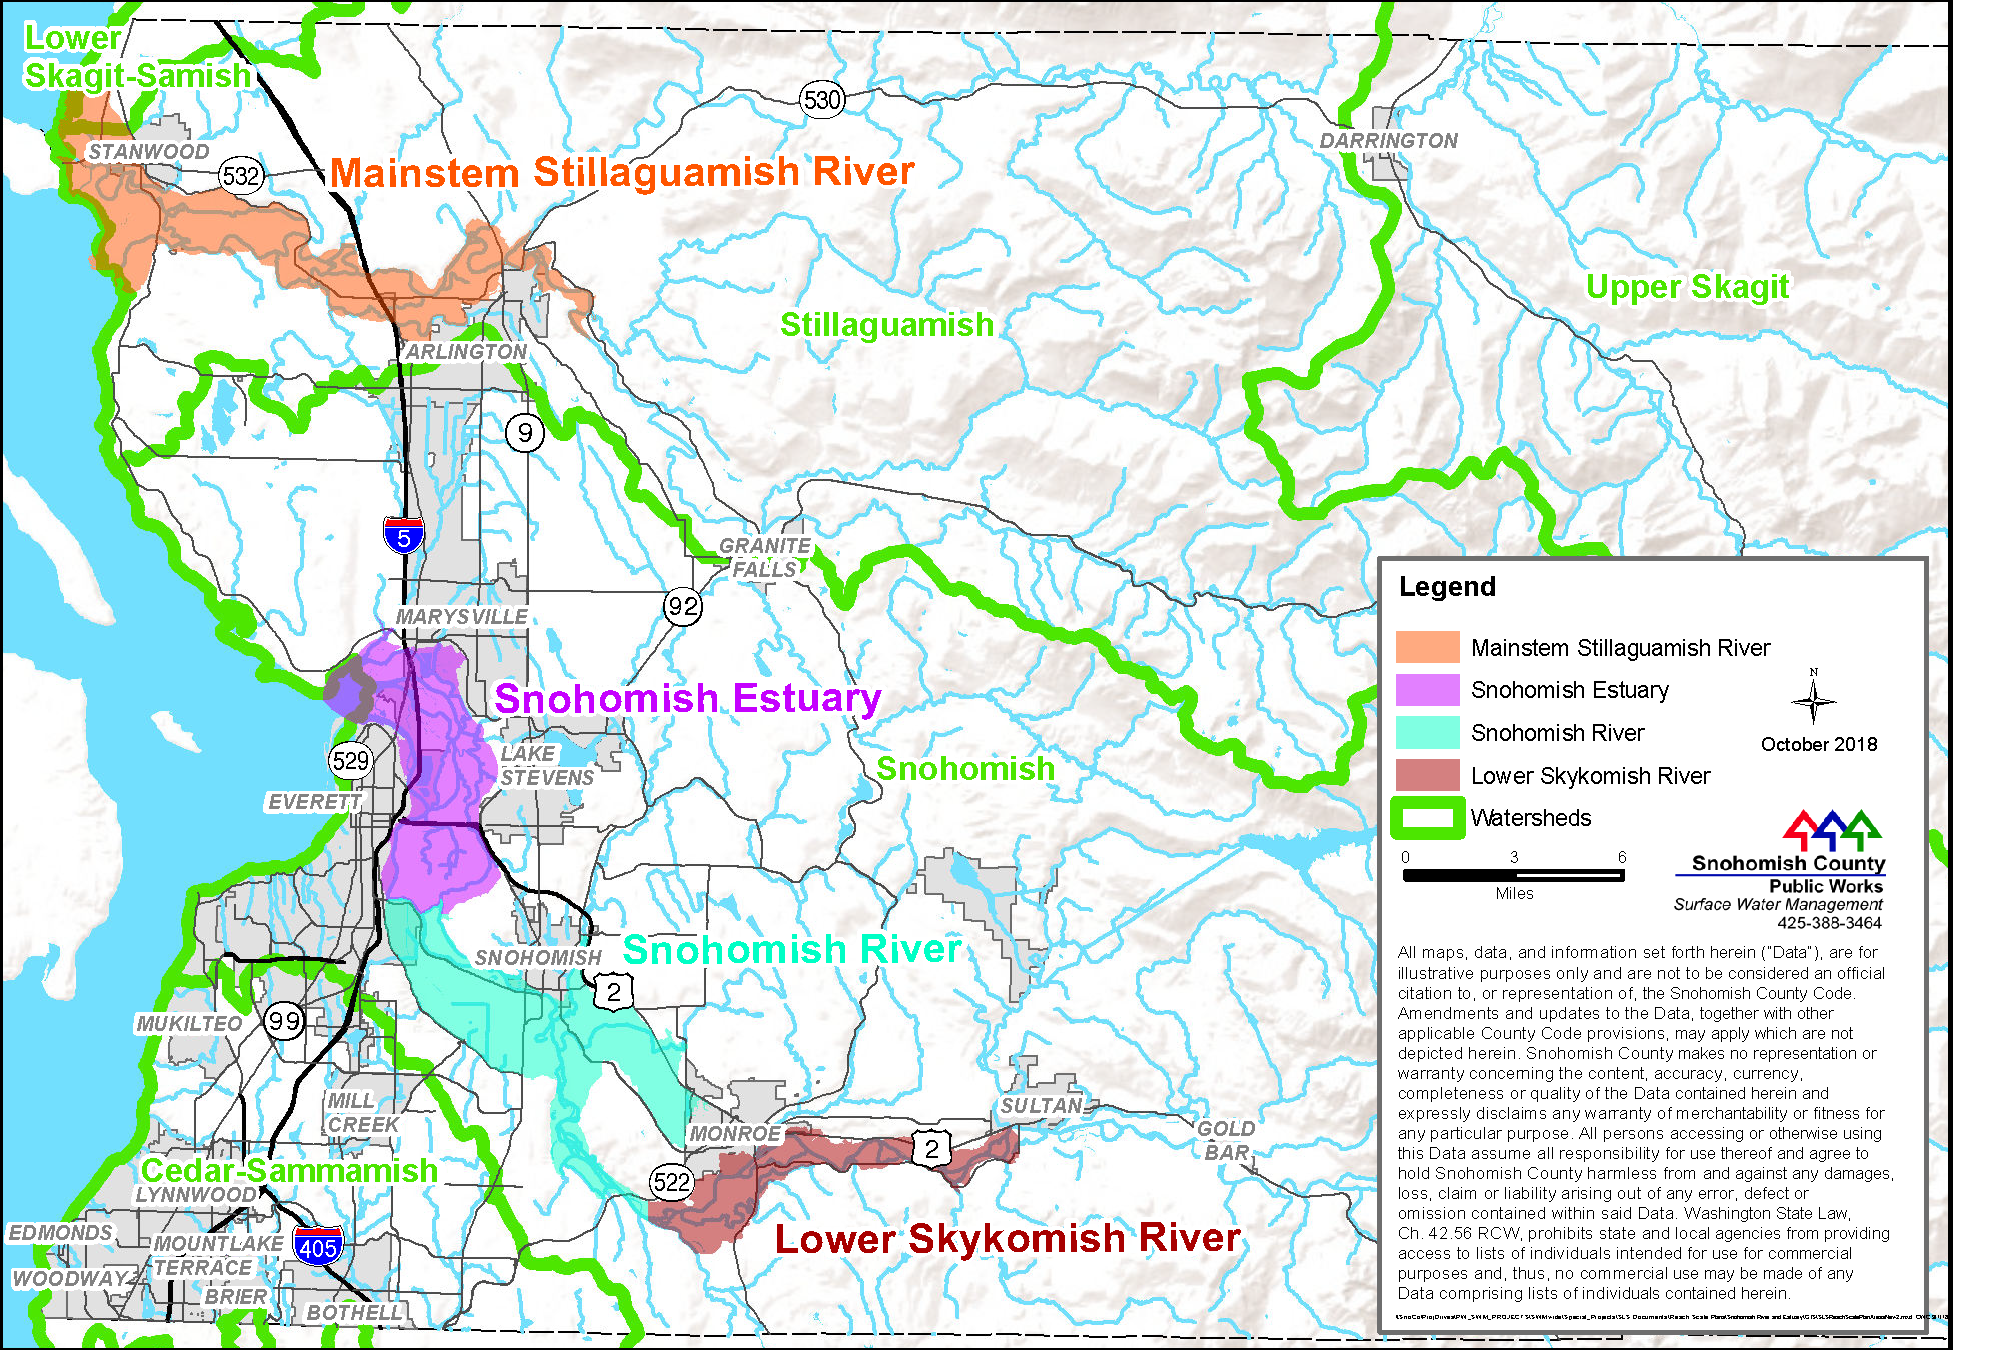 a map detailing the mainstem stillaguamish river is in the north, 
                                   snohomish estuary, snohomish river, and lower skykomish river further south. Watersheds are outlined in neon green.